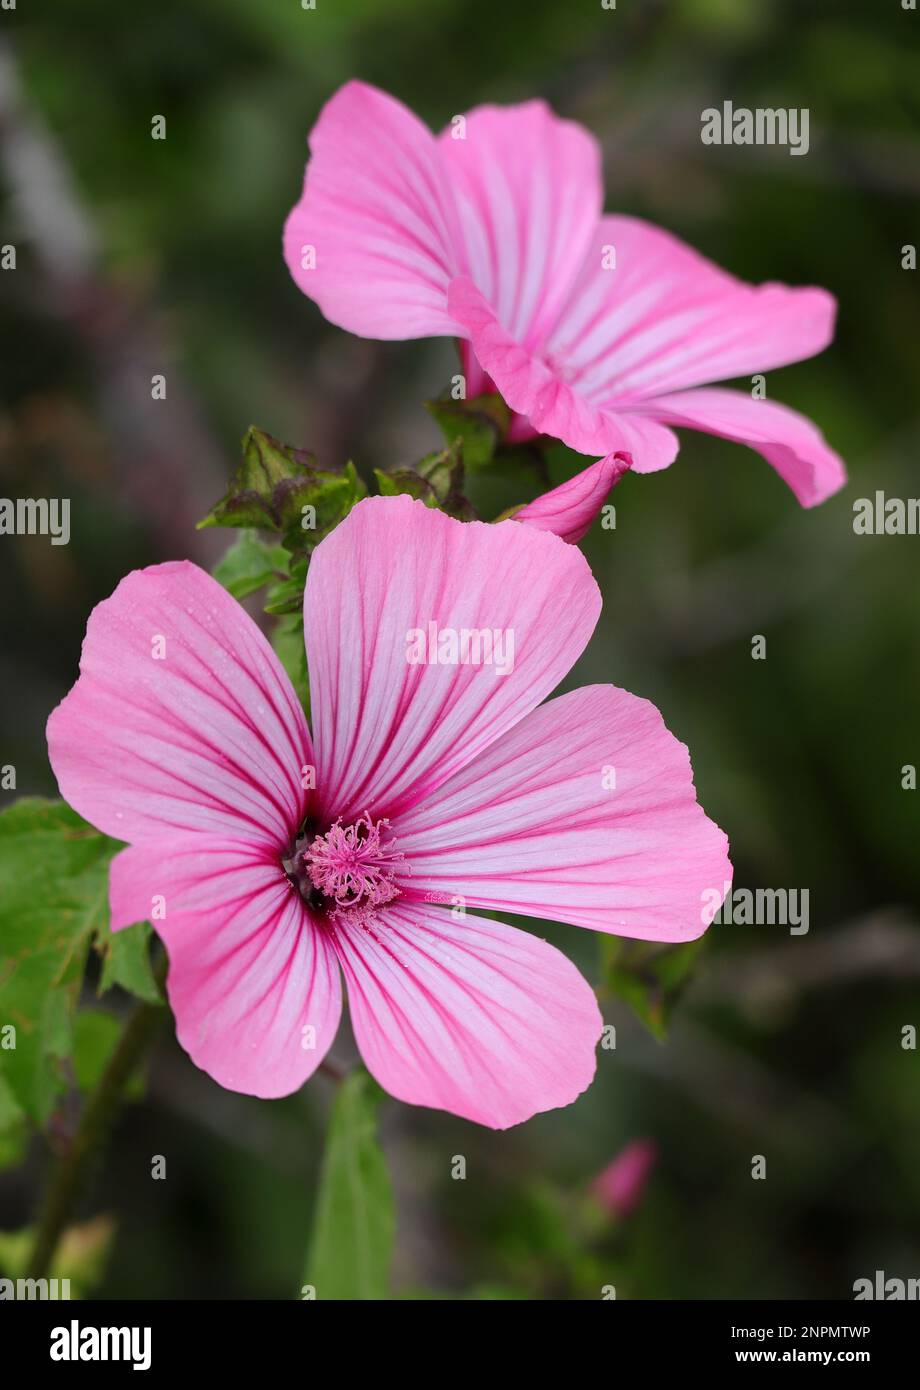 Spring, Portugal. Annual Mallows also known as Rose Mallow or Royal Mallow. Lavatera rosa in full bloom in natural surroundings. Malvaceae Family. Stock Photo